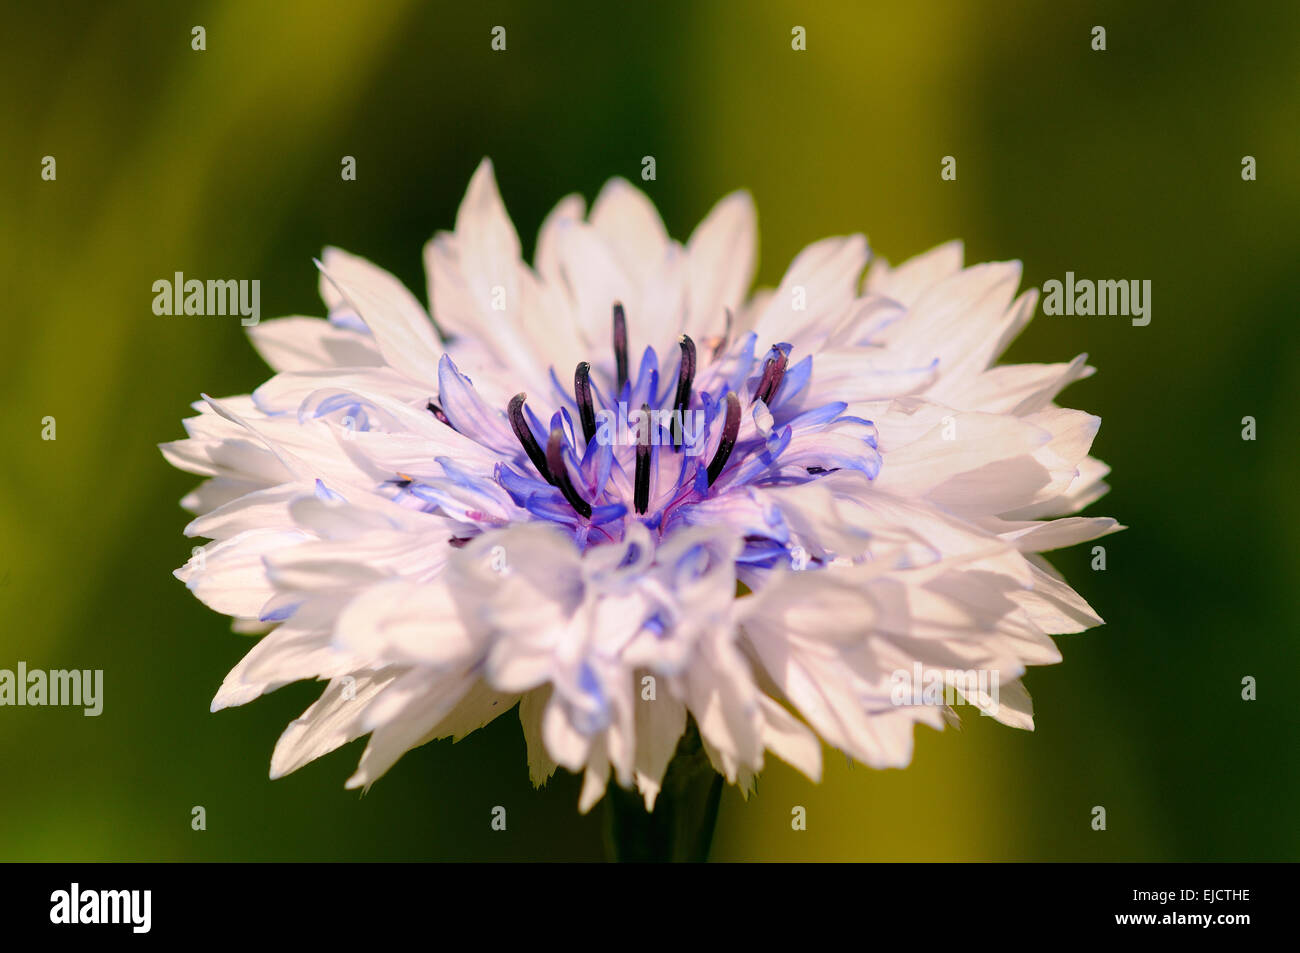 cornflower at the wither Stock Photo